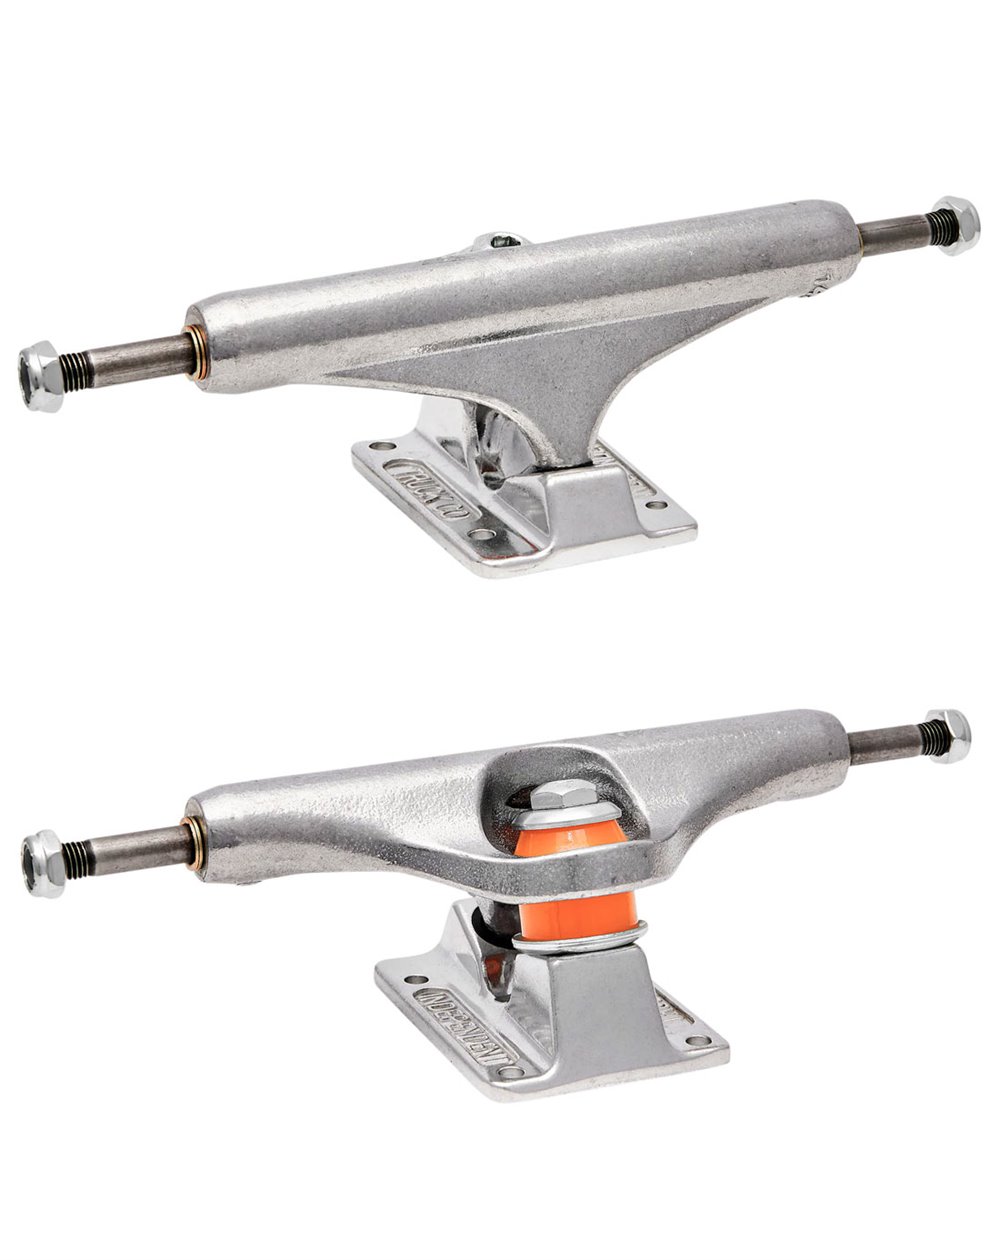 Independent MiD Forged Hollow 139mm Skateboard Trucks pack of 2